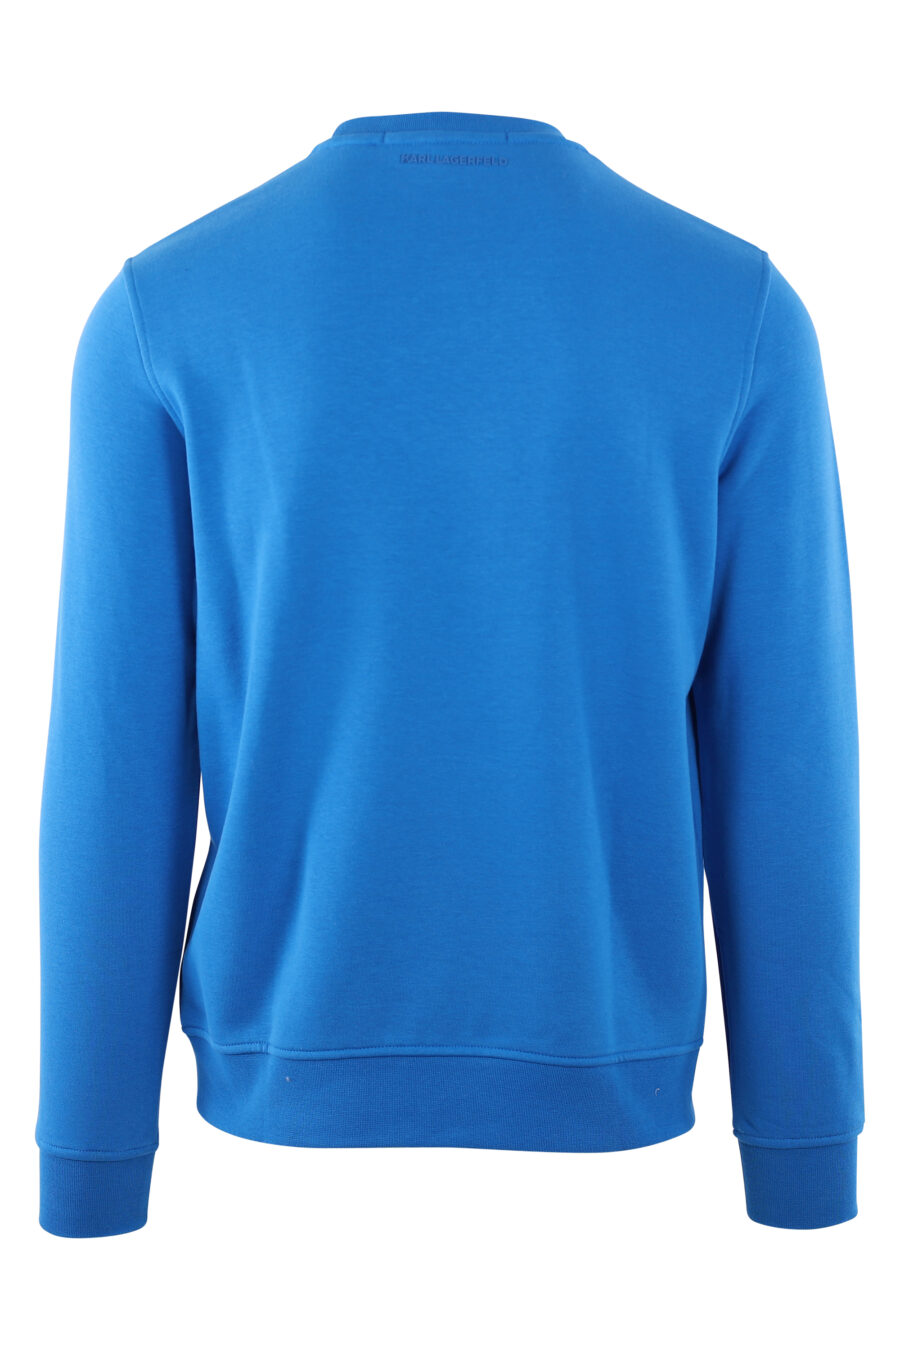 Blue sweatshirt with "rue st-guillaume" logo - IMG 2839 1